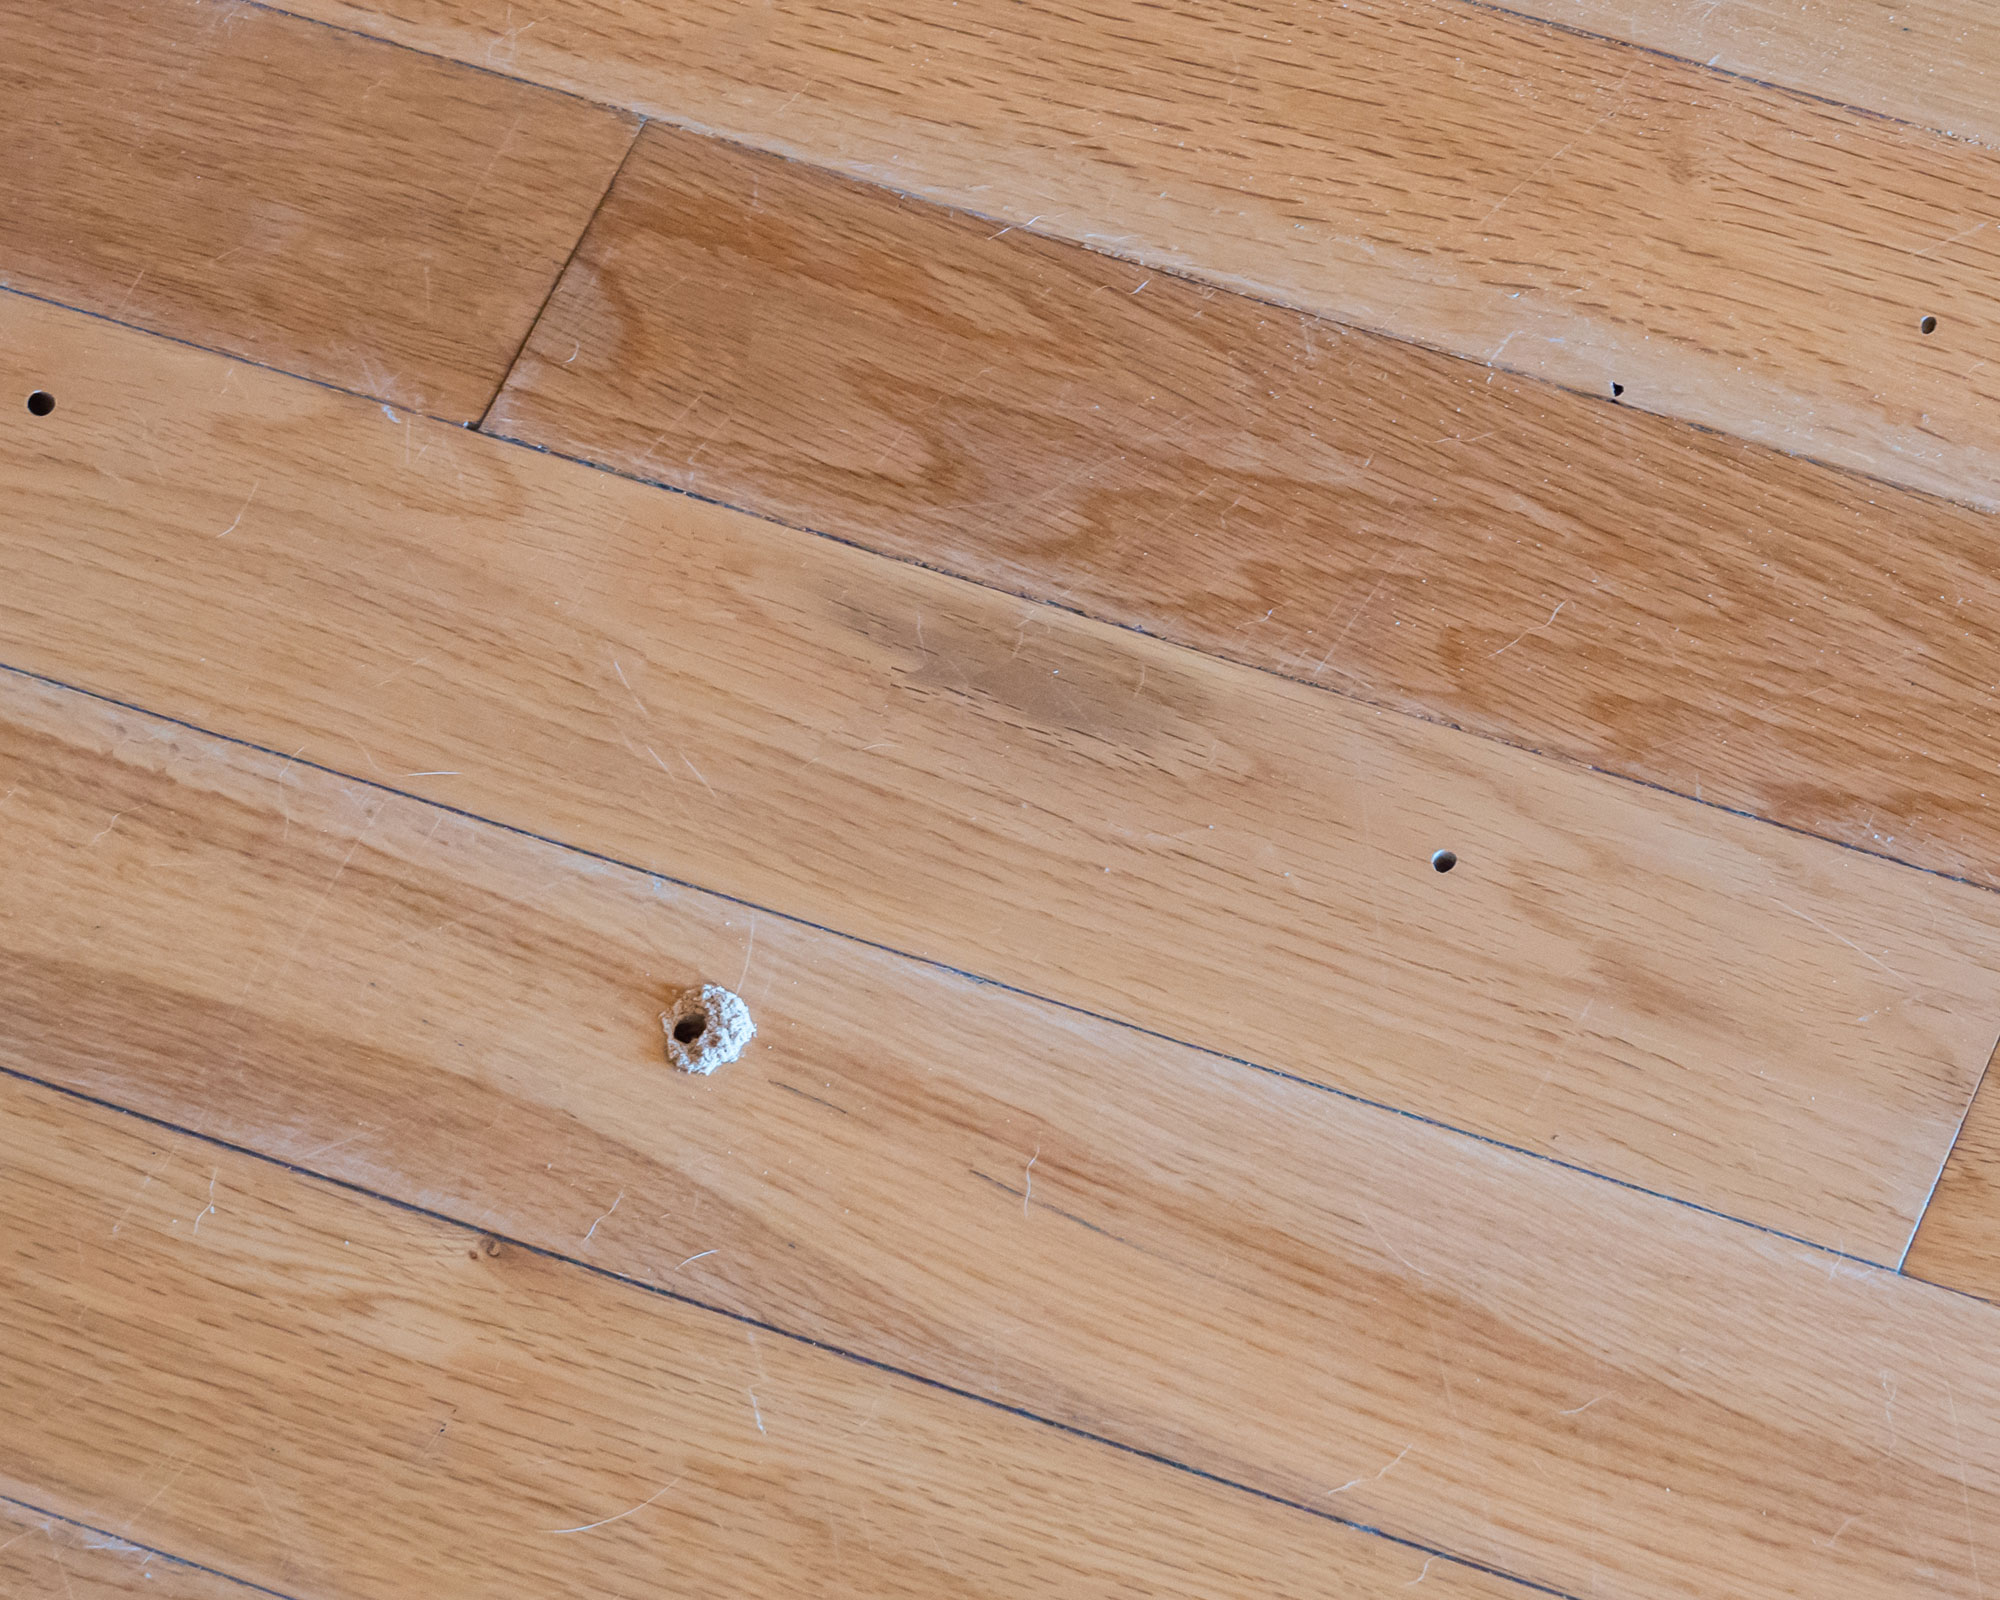 how to get rid of pests - woodworm holes in flooring - GettyImages-1176375969